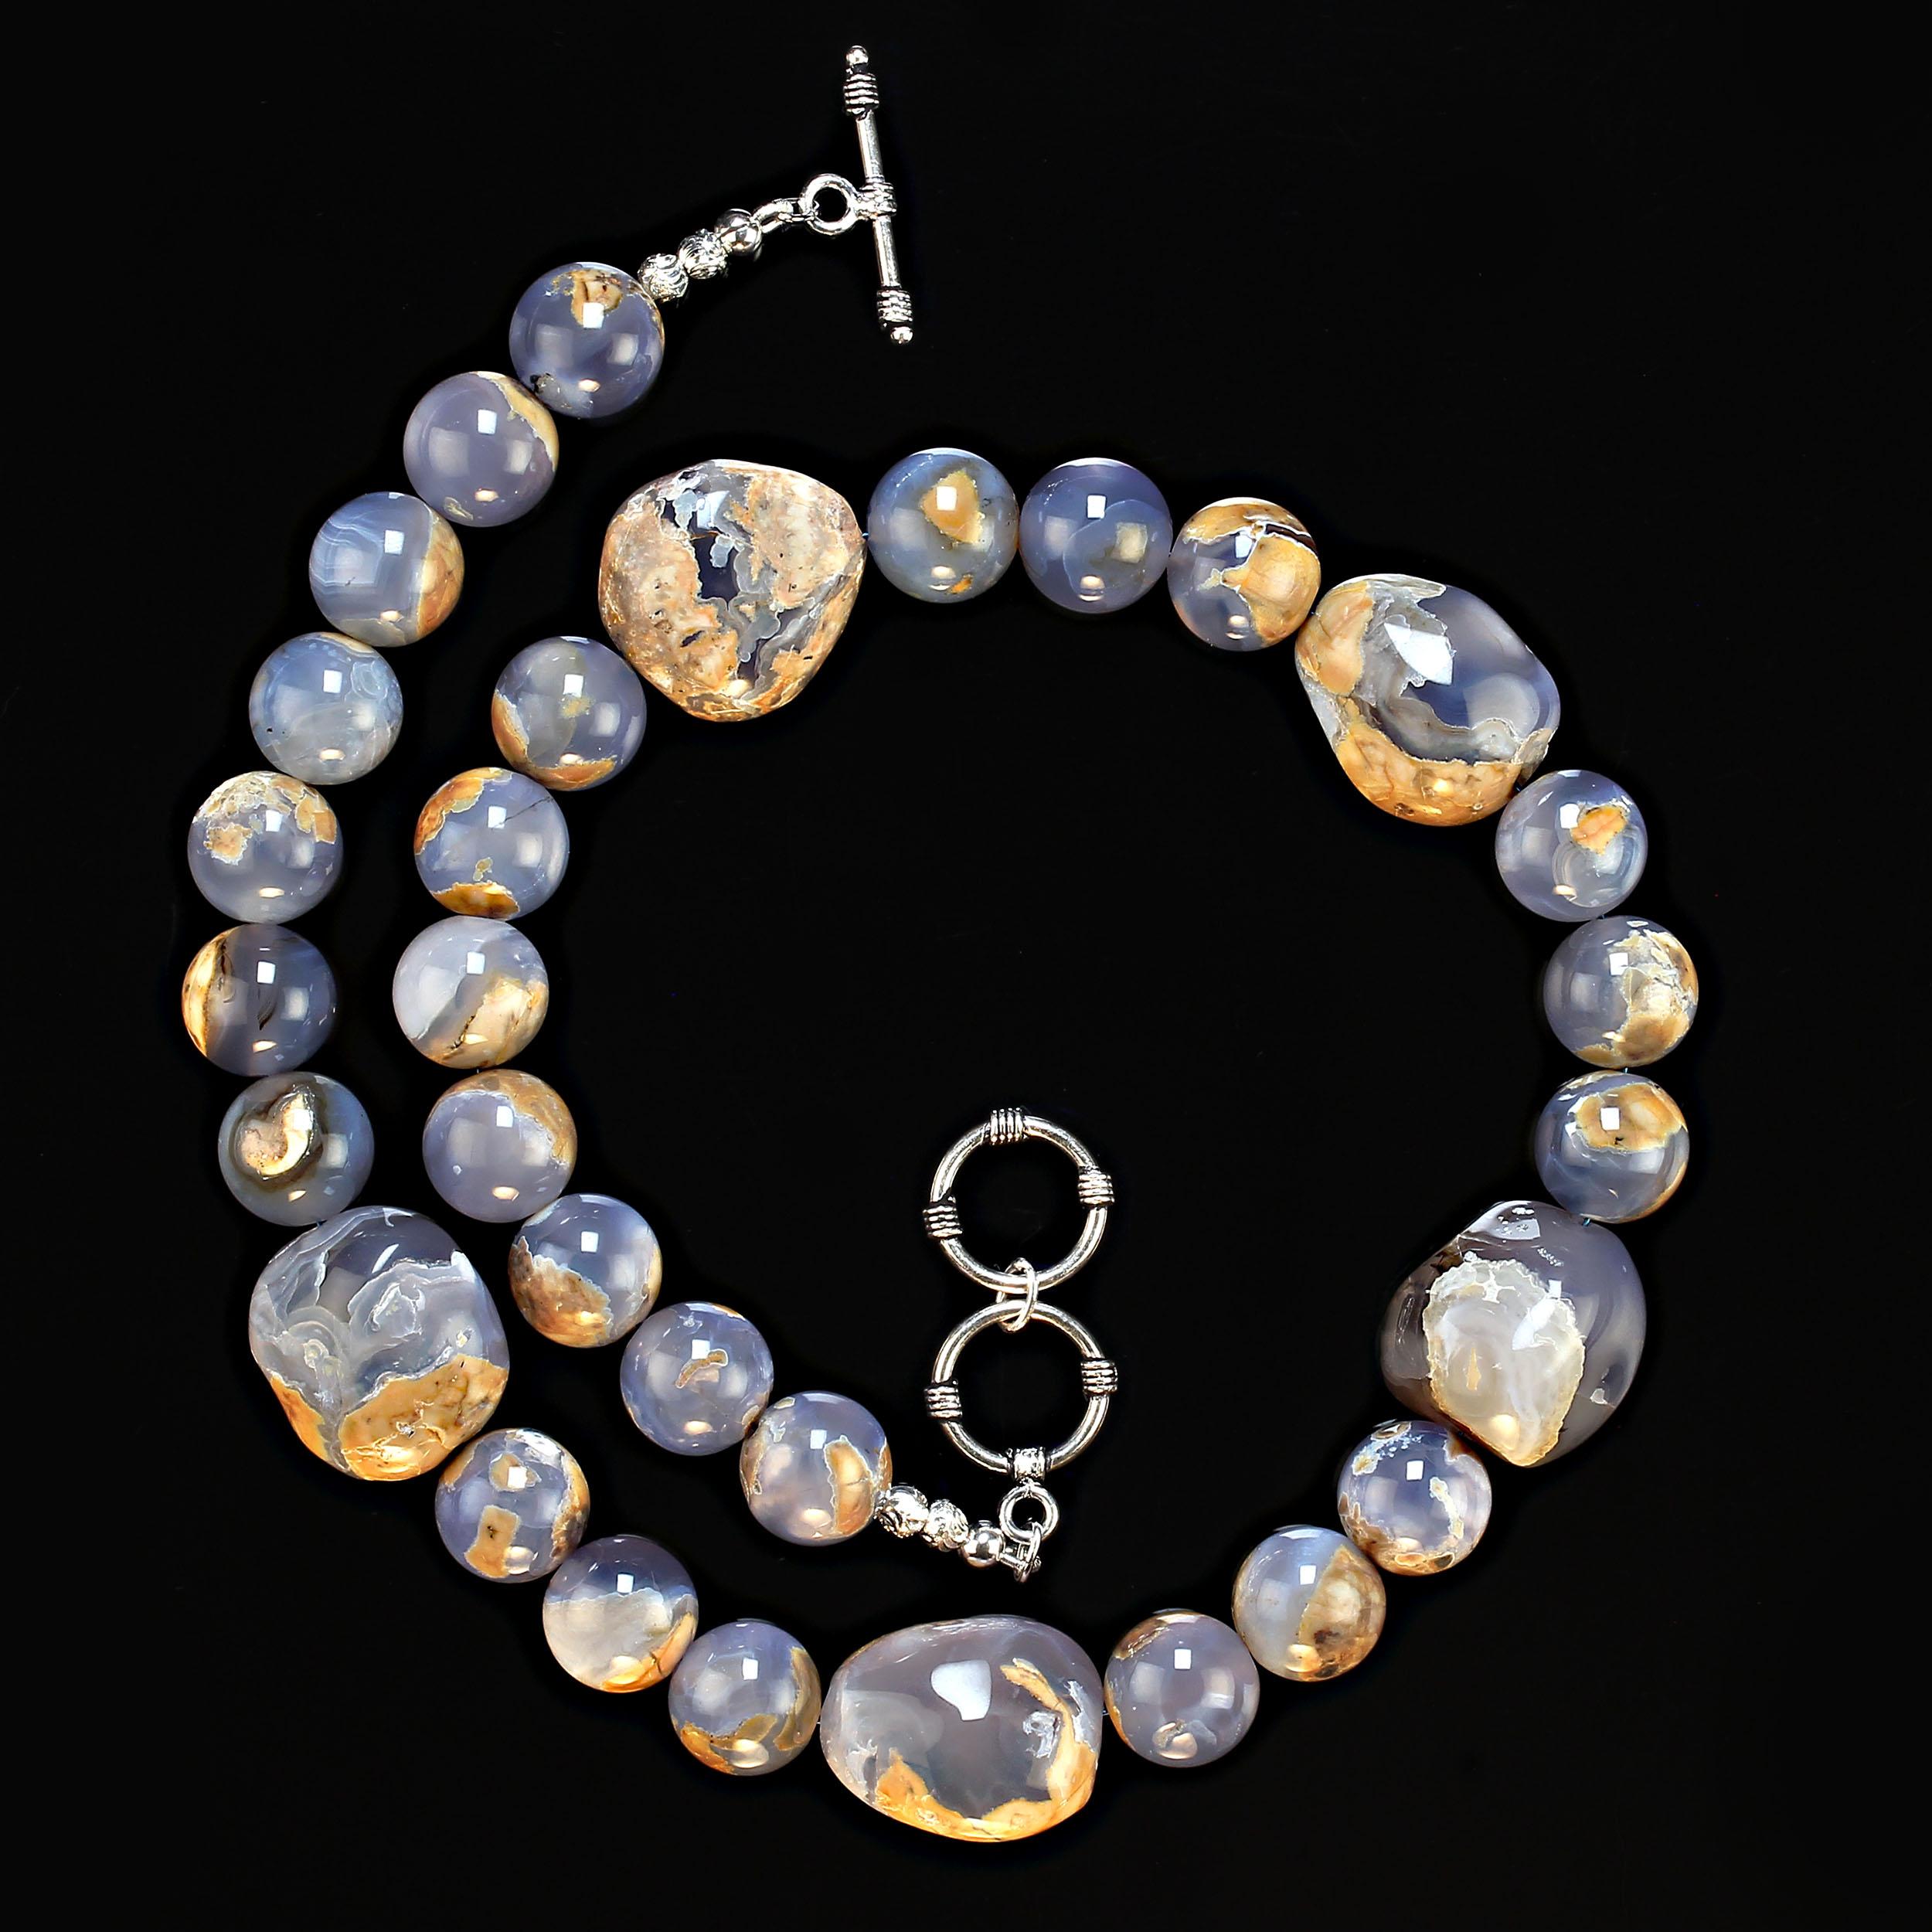 I9 Inch necklace of highly polished 13mm blue chalcedony with matrix.  This necklace features five additional blue chalcedony nuggets, each one is unique and fascinating.  The necklace is secured with a two-ring silver plate toggle clasp.  MN2353